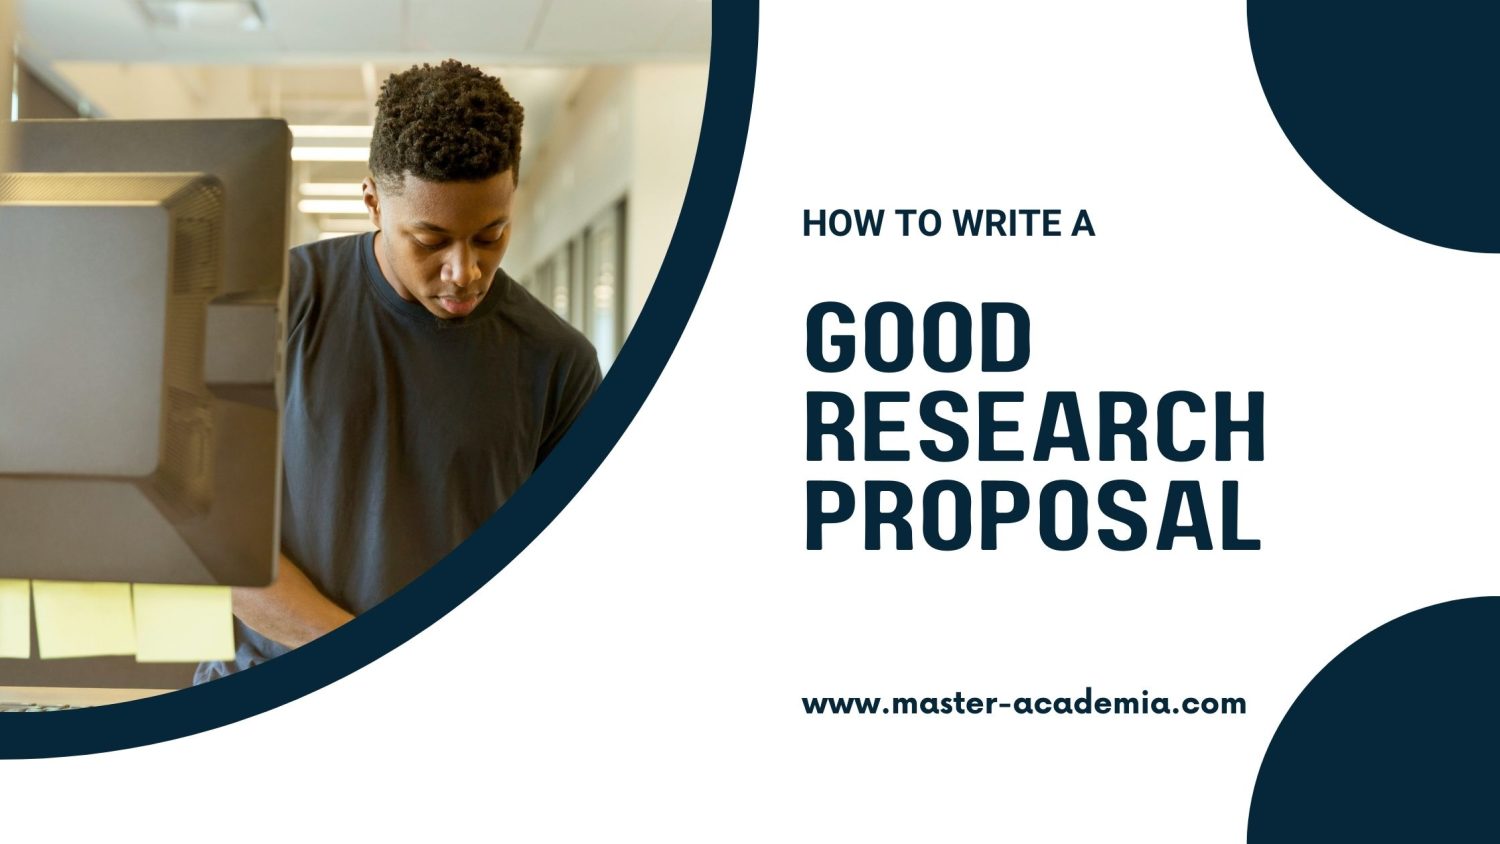 research proposal uct